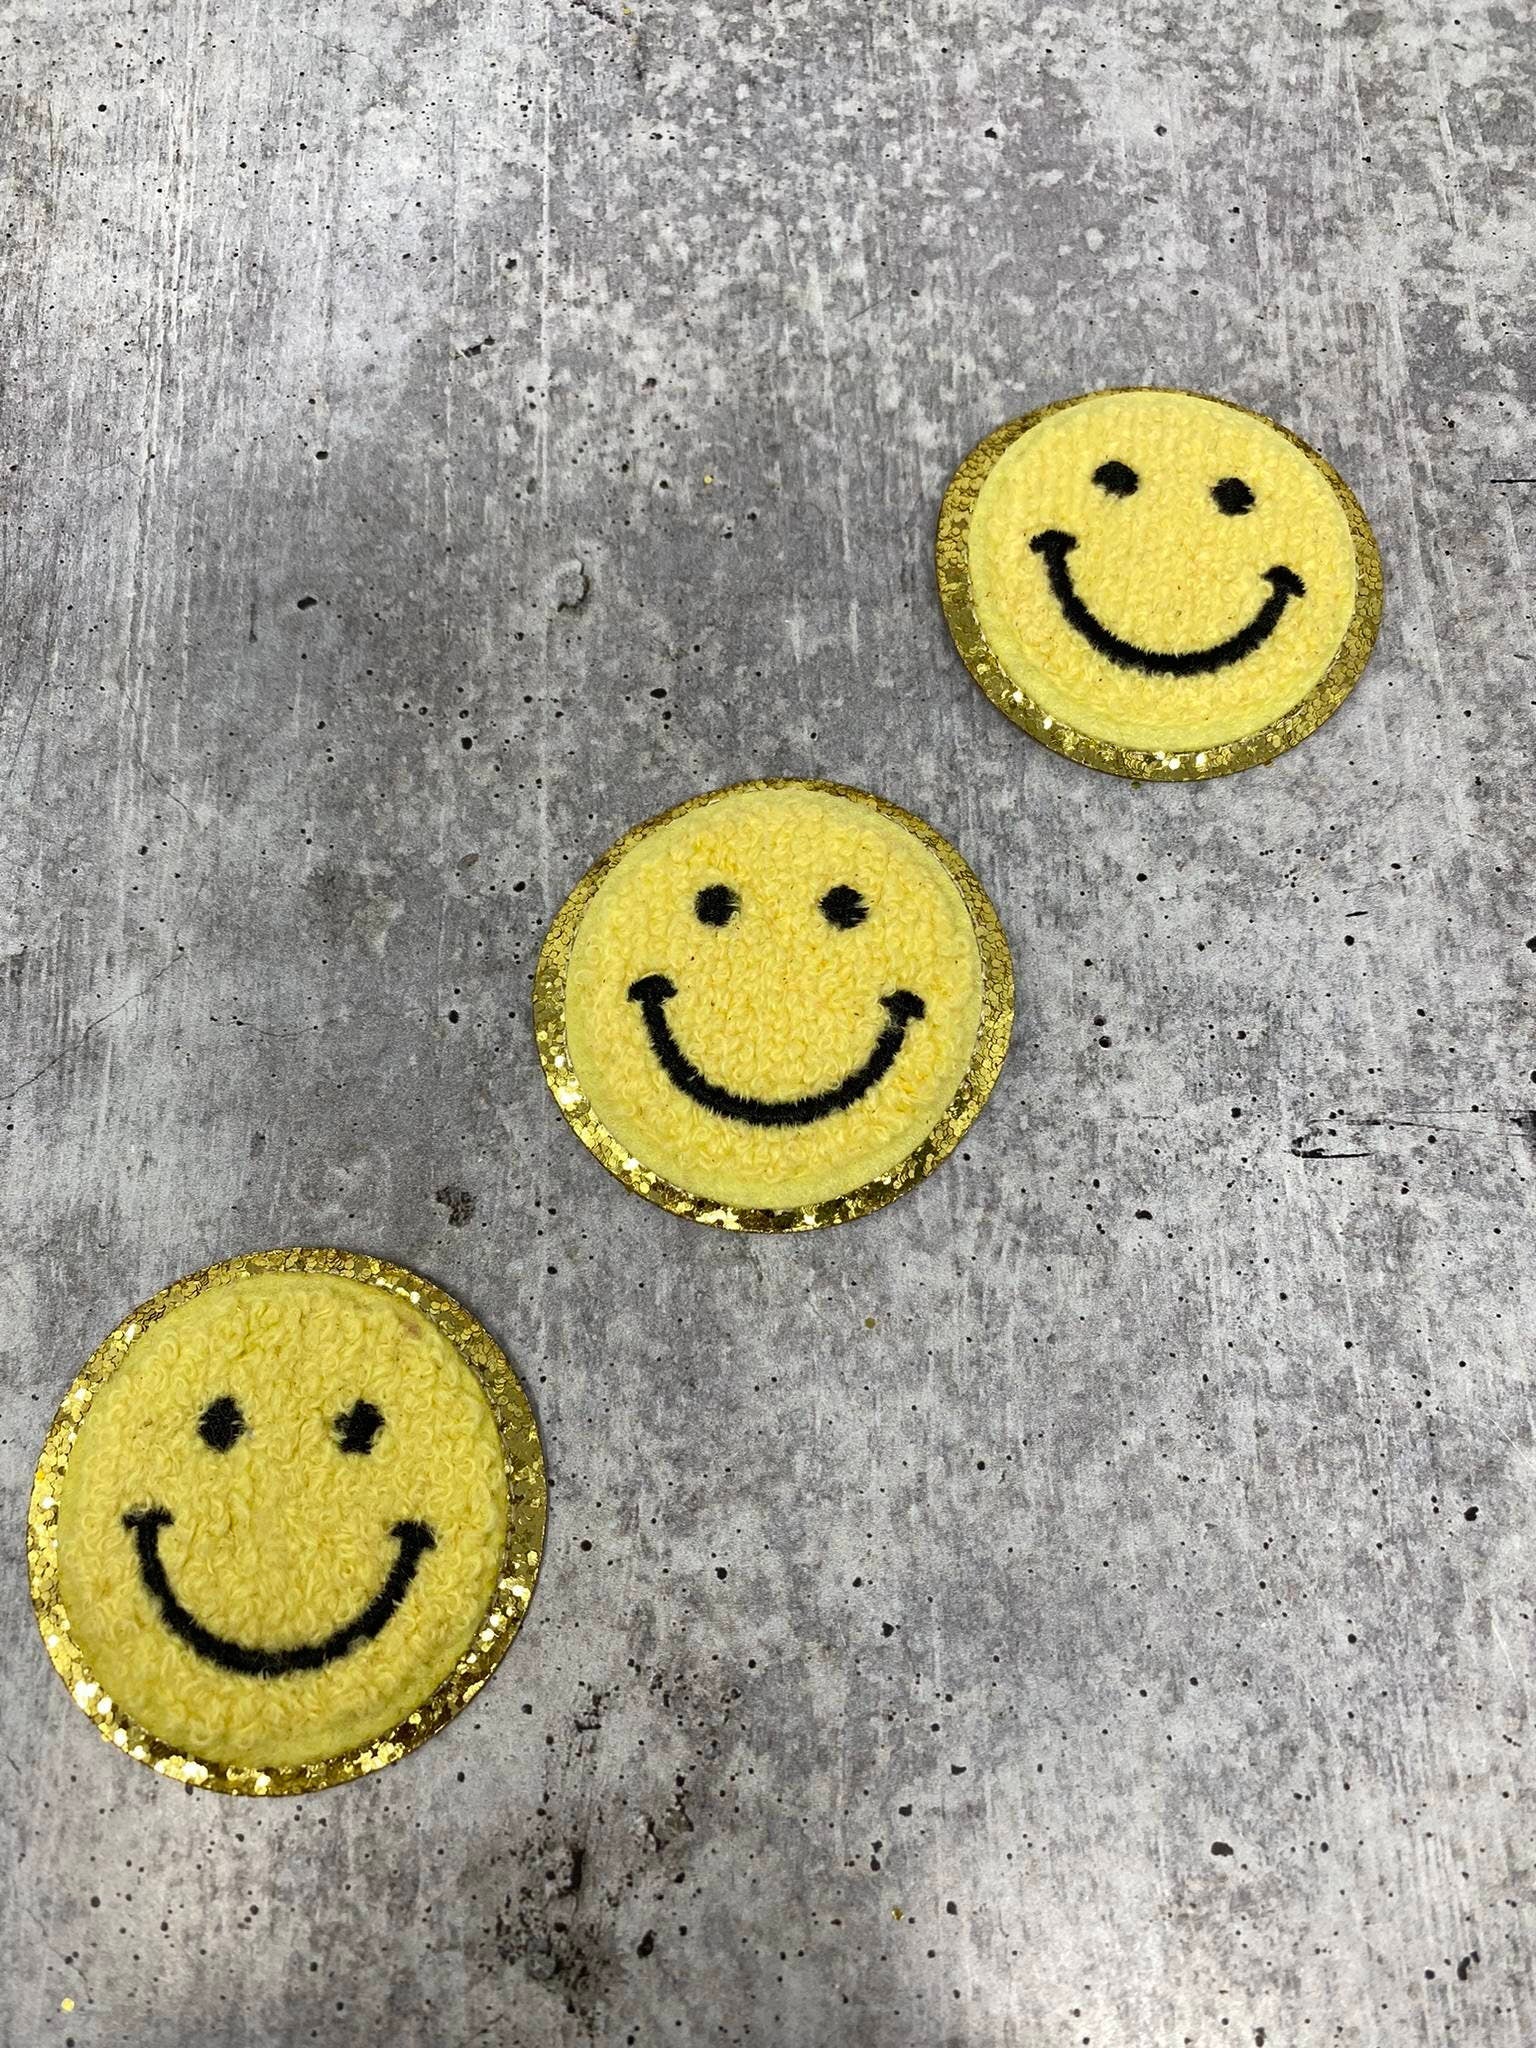 New: Yellow, Chenille "Smile Patch" w/ Gold Glitter, Size 2.5", Smiley Face Patch with Iron-on Backing, Fuzzy Happy Face Applique, Fun Patch